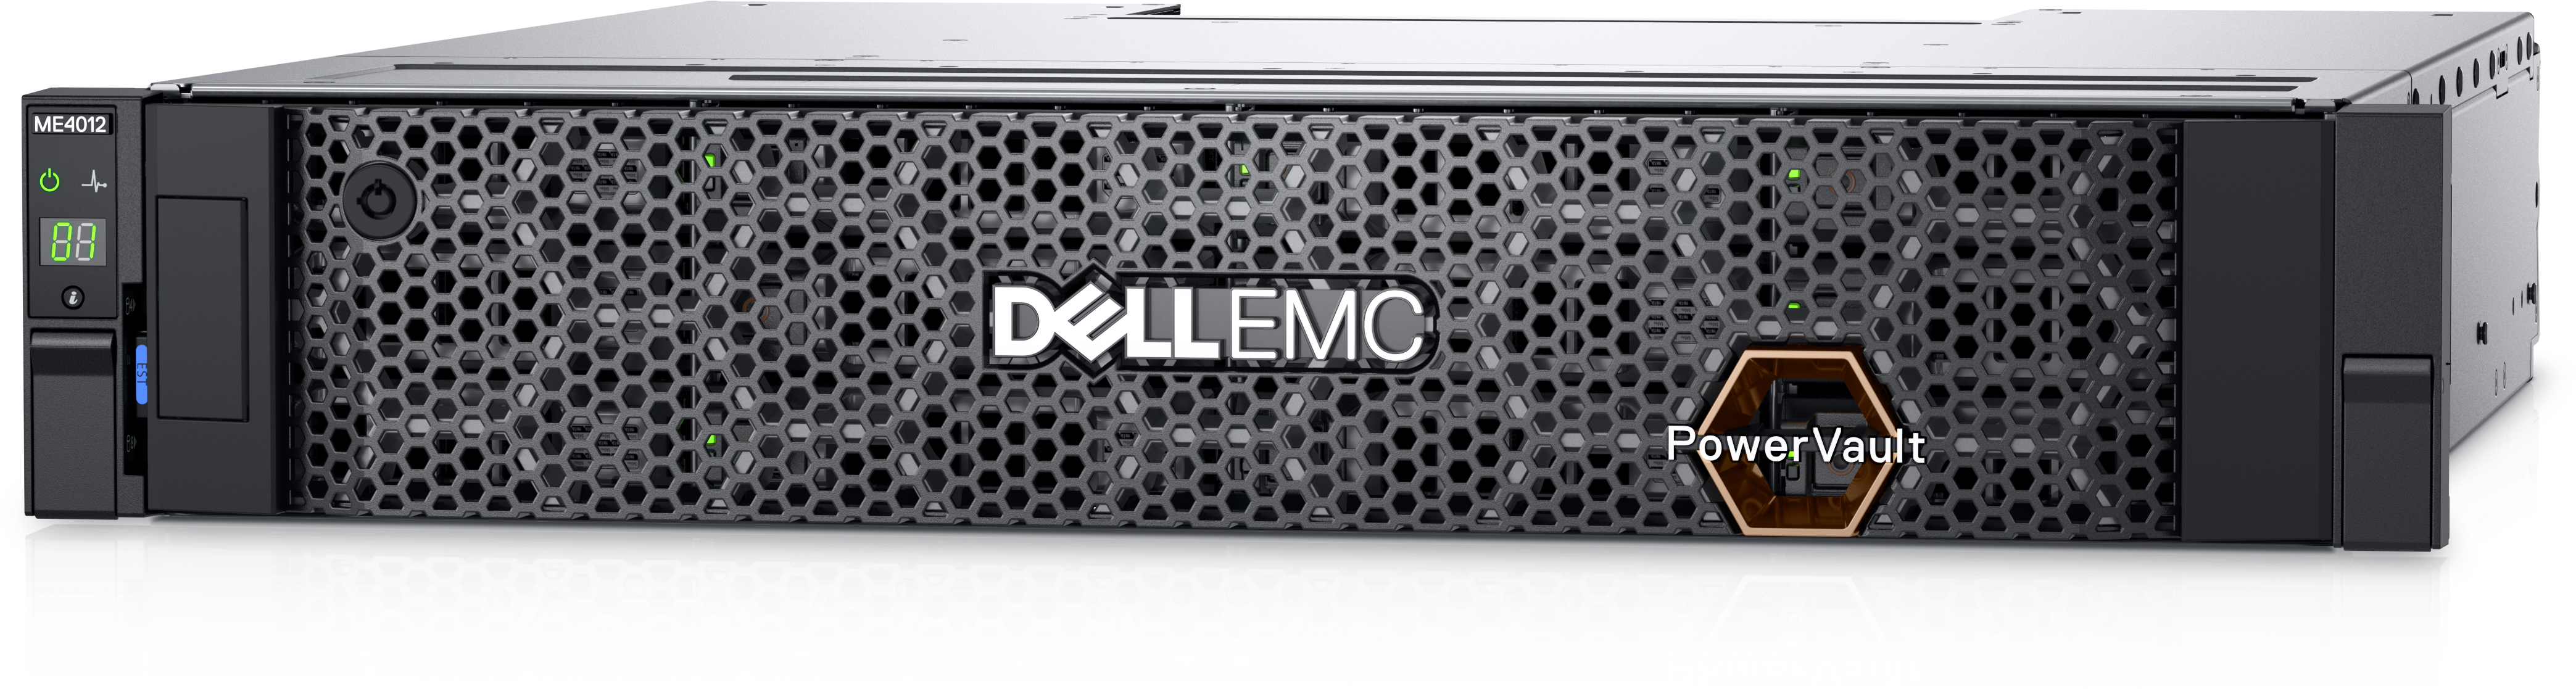 Dell Powervault Me5 Series